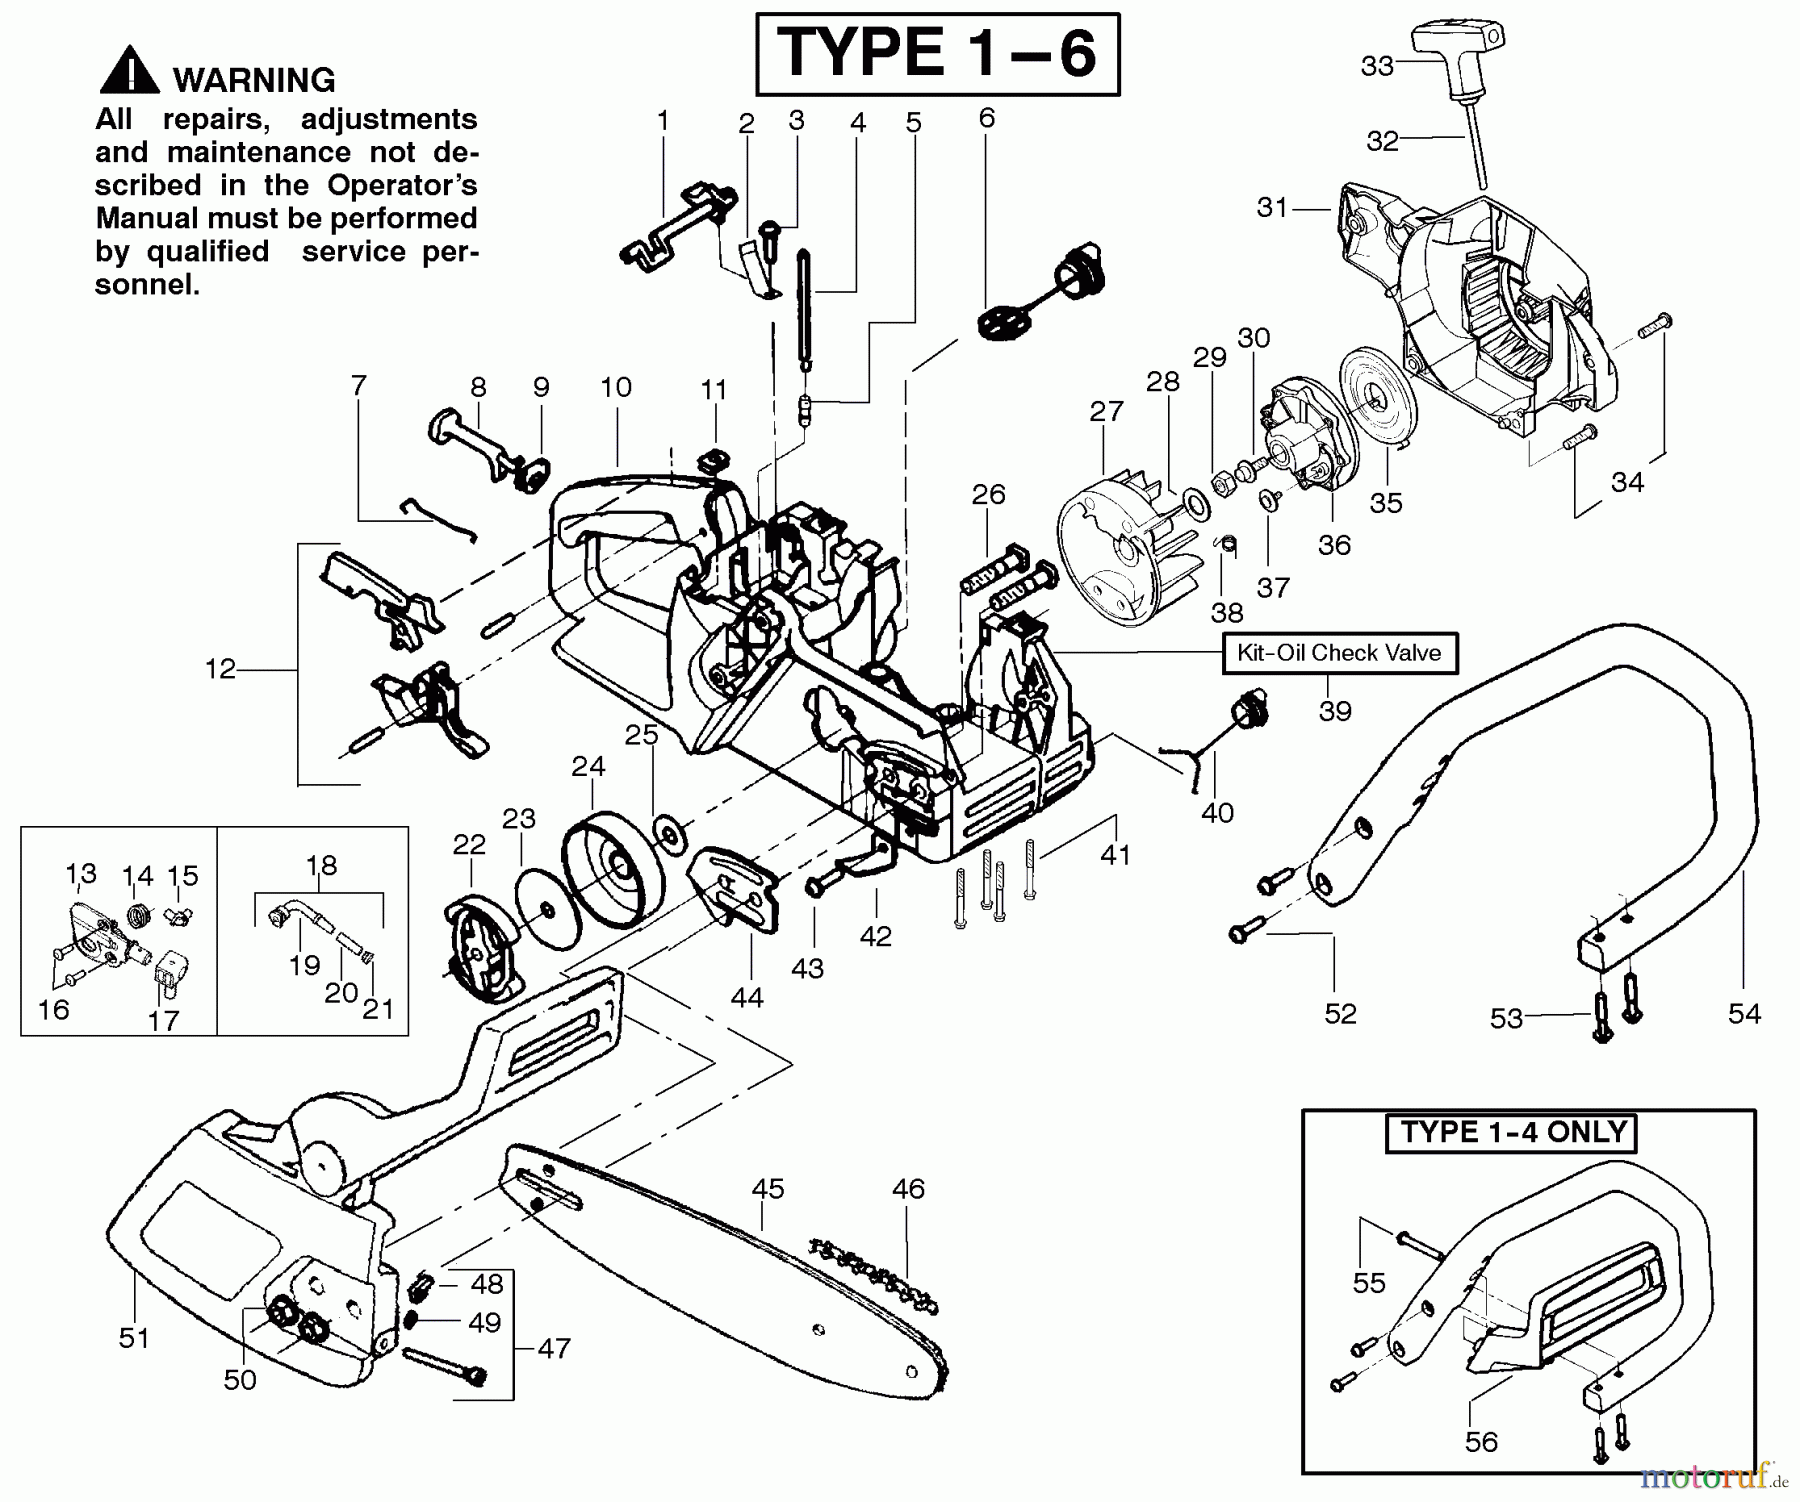  Poulan / Weed Eater Motorsägen 2375 (Type 1) - Poulan Wildthing Chainsaw Handle, Chassis & Bar Assembly Type 1-6